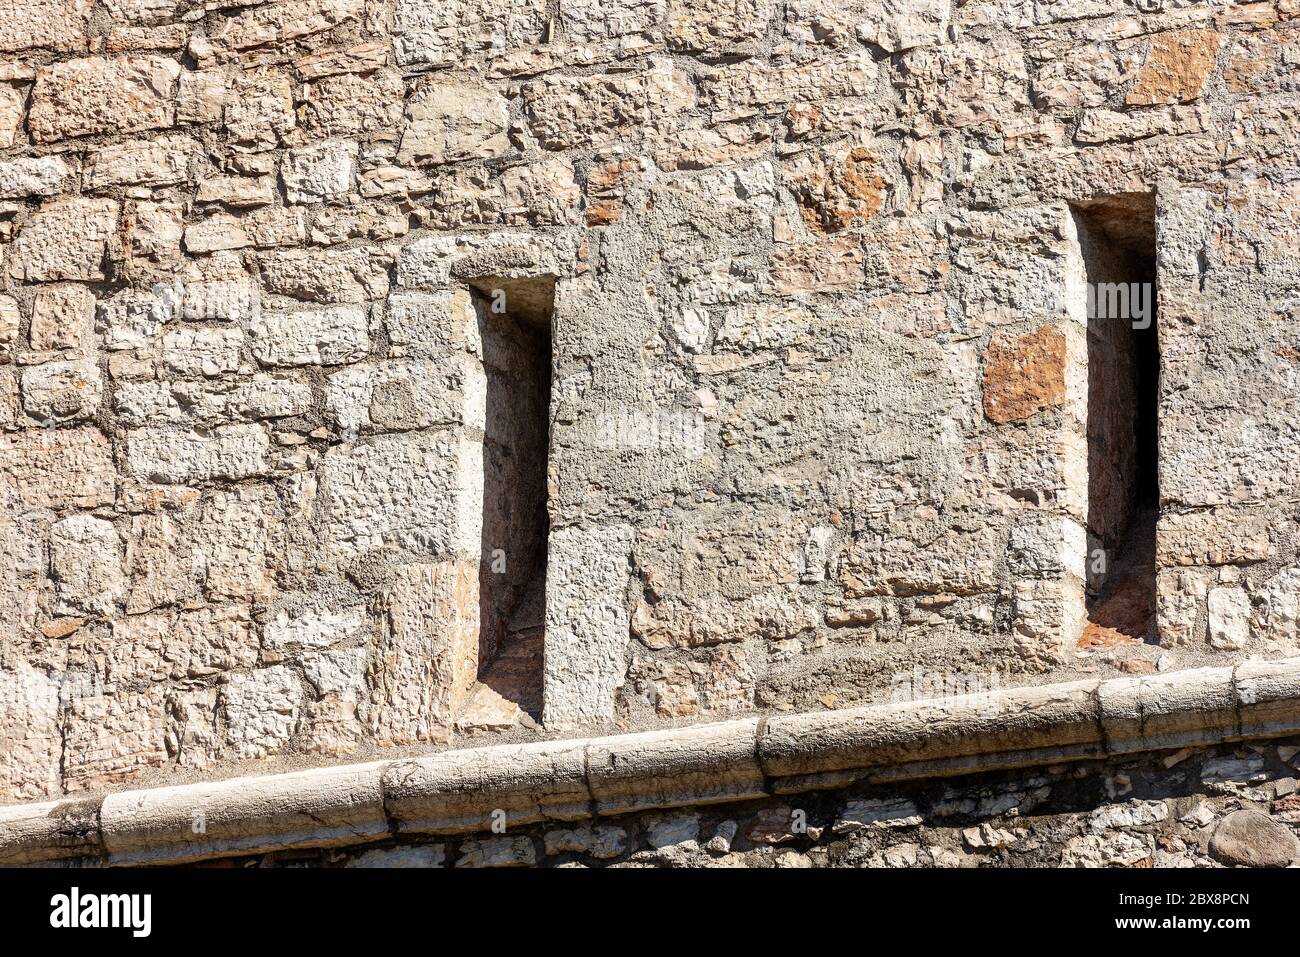 Close-up of a medieval castle wall with two arrowslits or loopholes. Castello del Buonconsiglio or Castelvecchio in Trento city. Trentino Alto Adige. Stock Photo